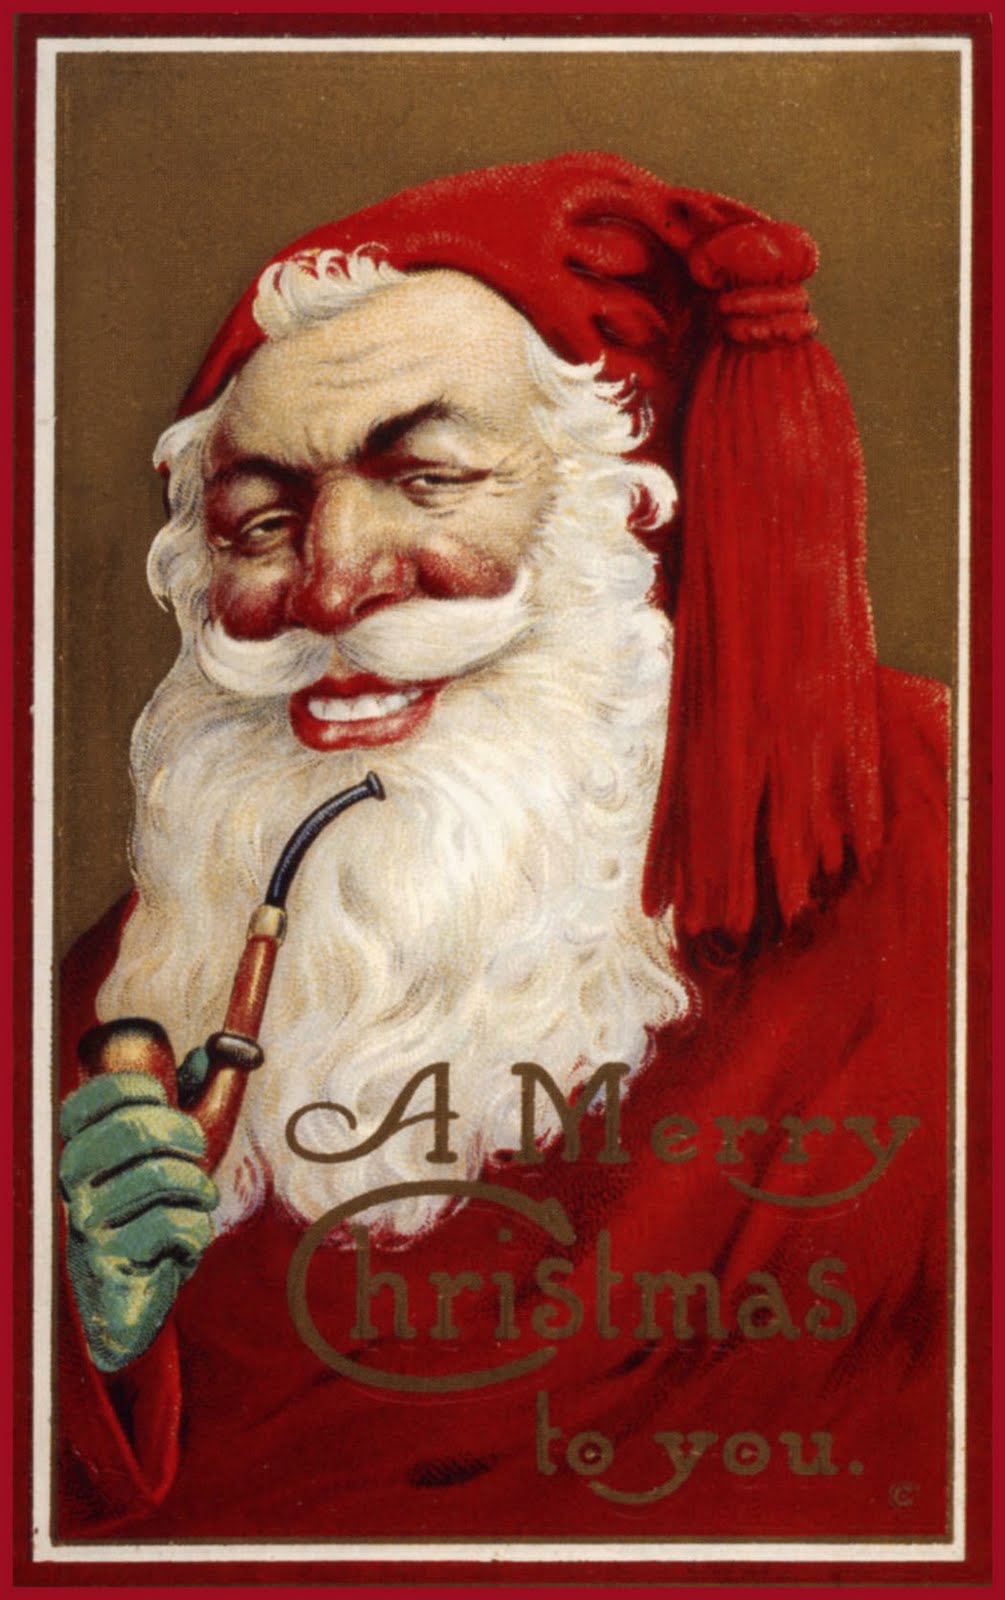 The Pictorial Arts: Visions of Santa